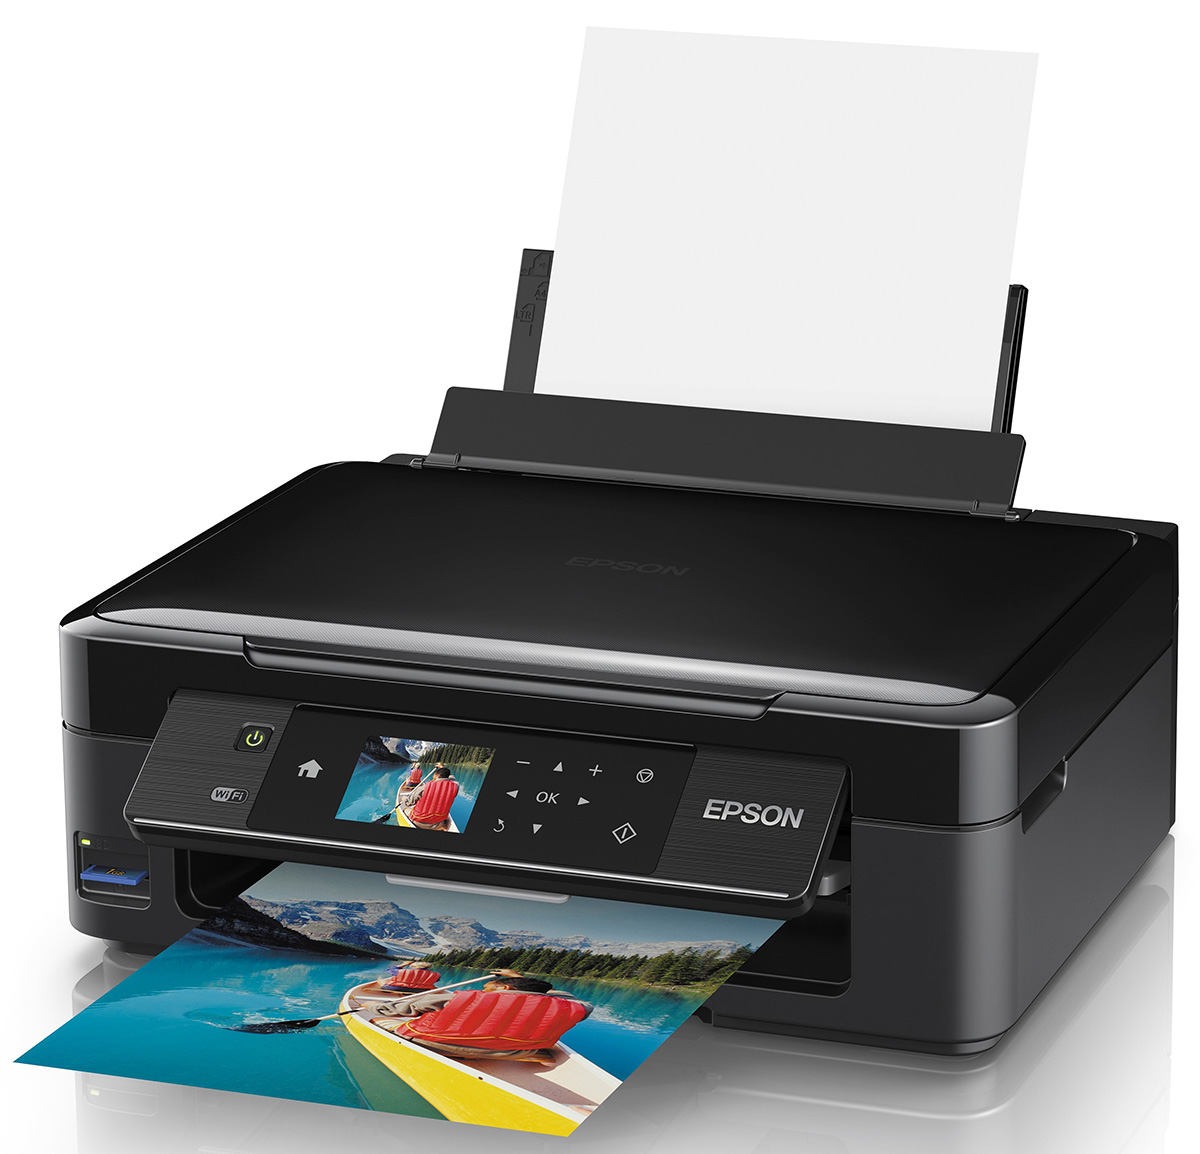 How To Reset An Epson Printer